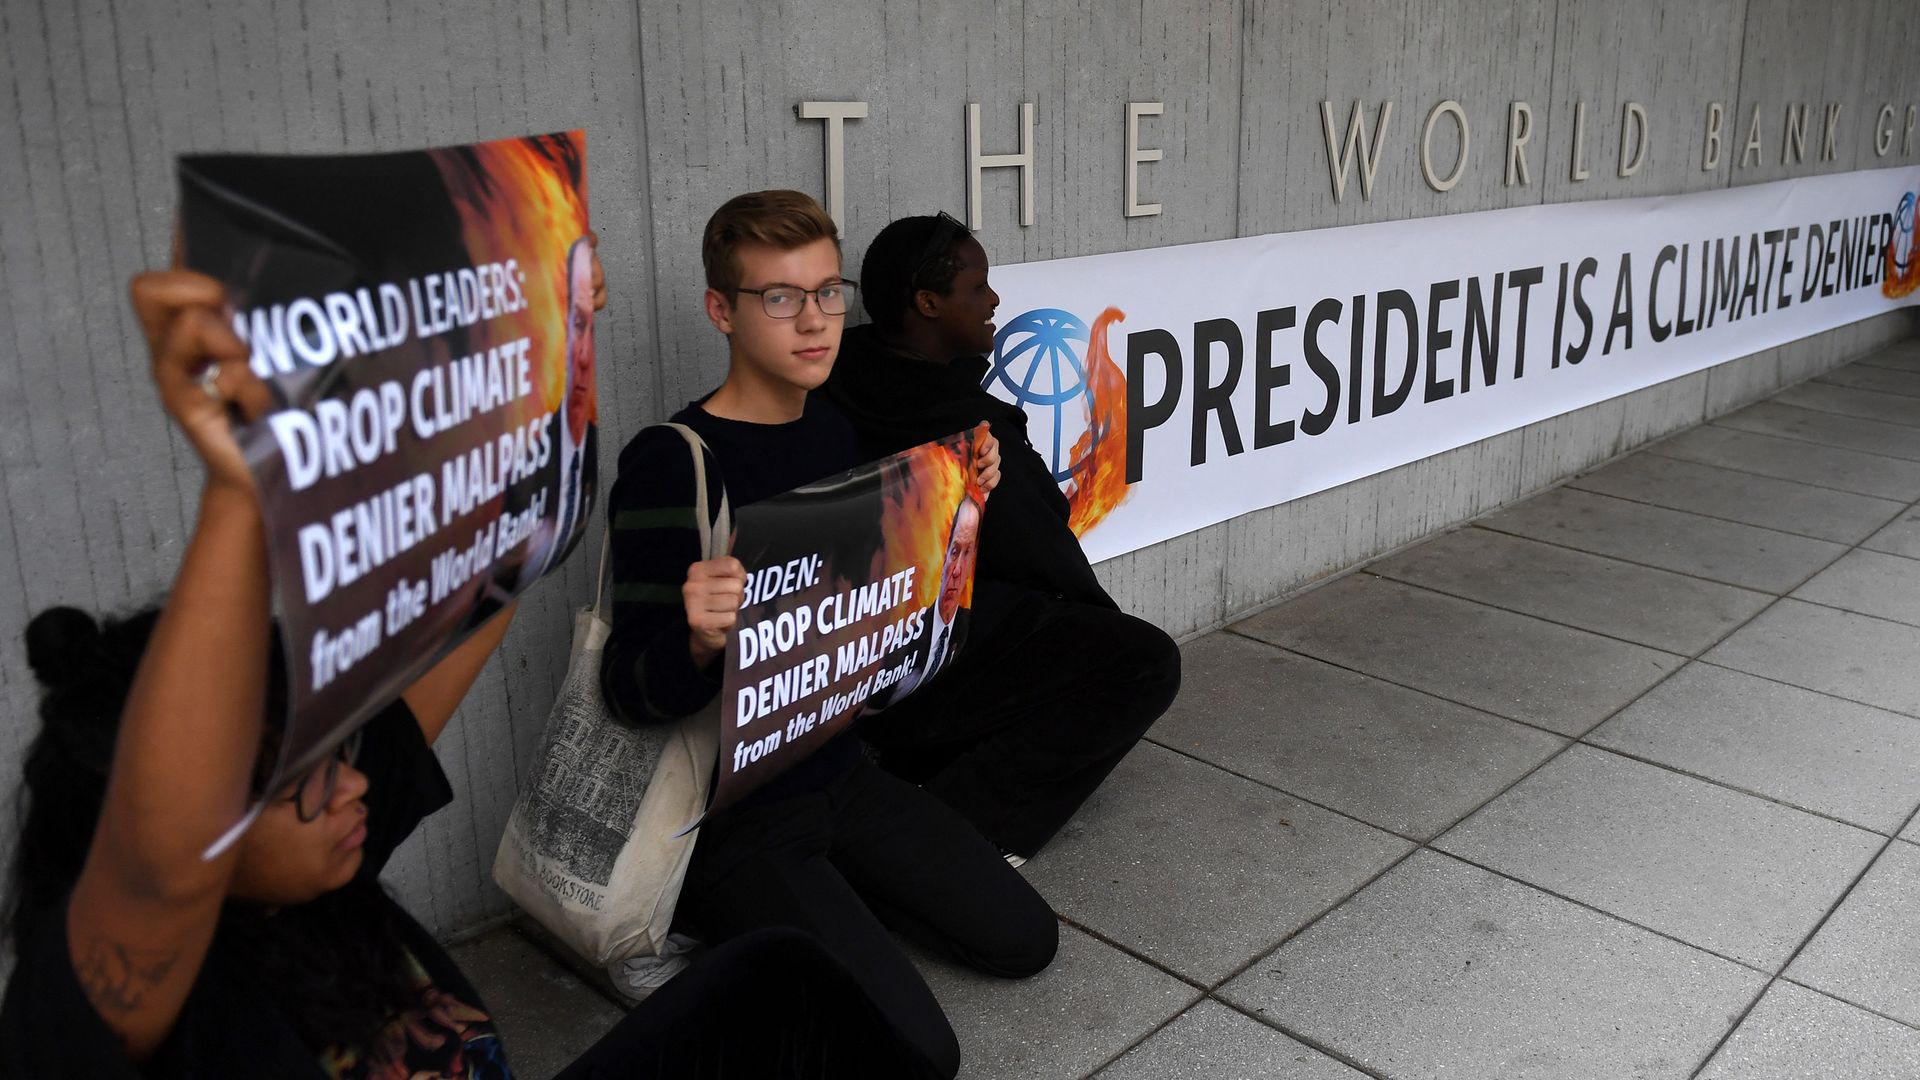 Protestors at the World Bank after the bank's president made comments skeptical of the scientific consensus on climate change.